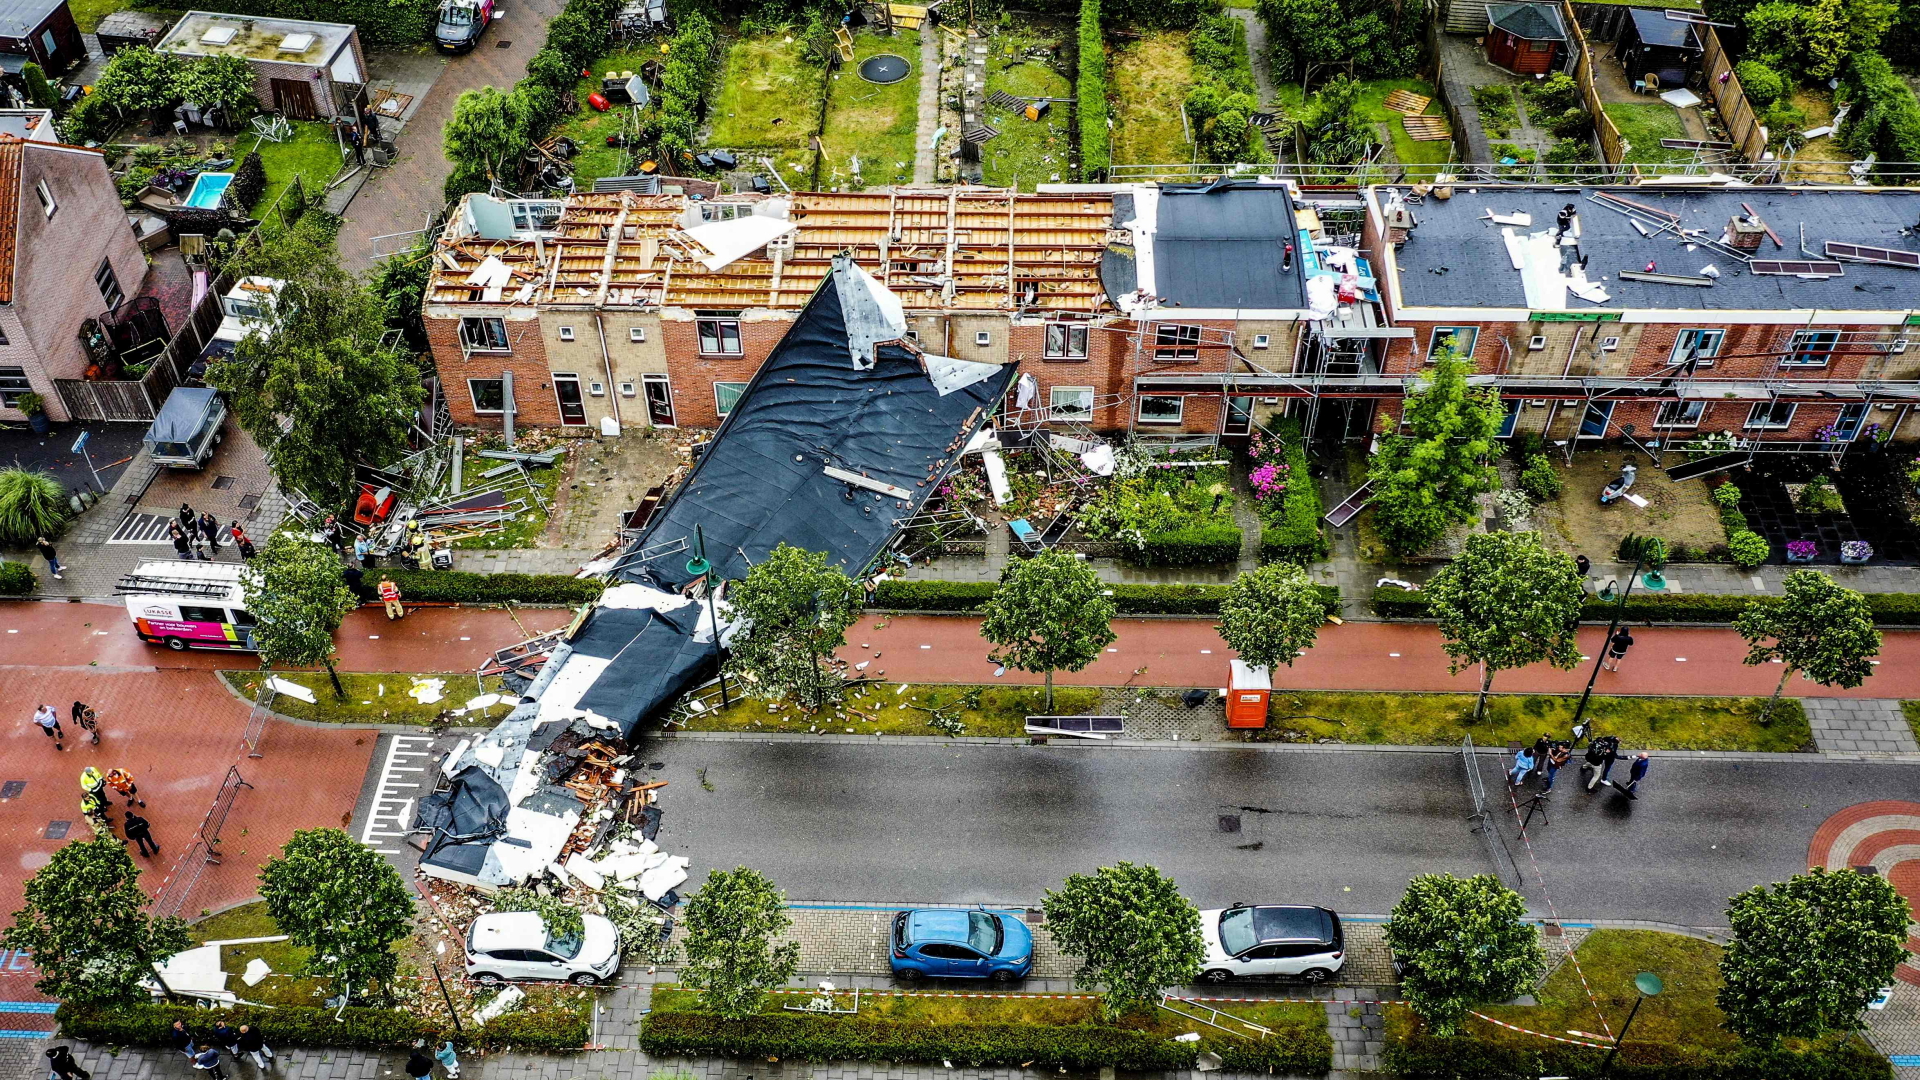 Coastal city Zierikzee: One person died in a hurricane in the Netherlands